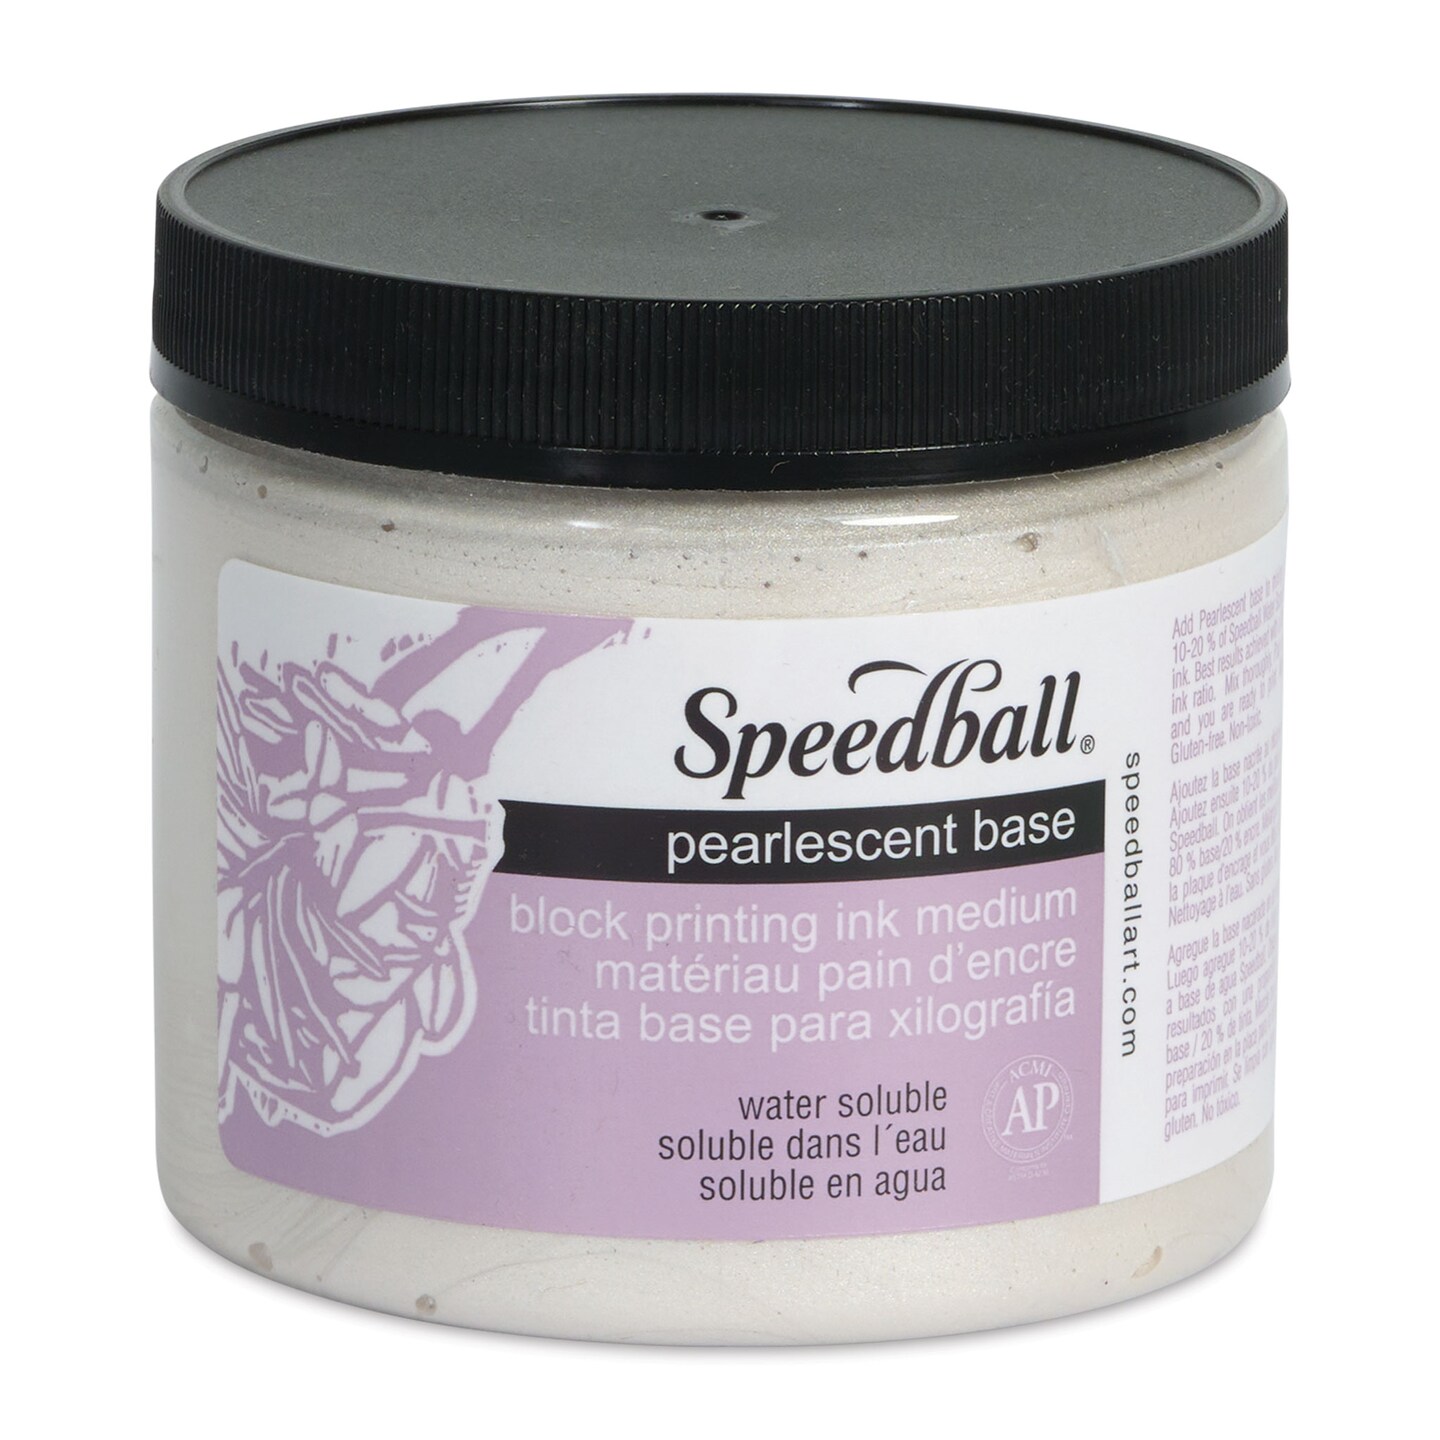 Speedball Water-Soluble Block Printing Ink Pearlescent Base - 16 oz